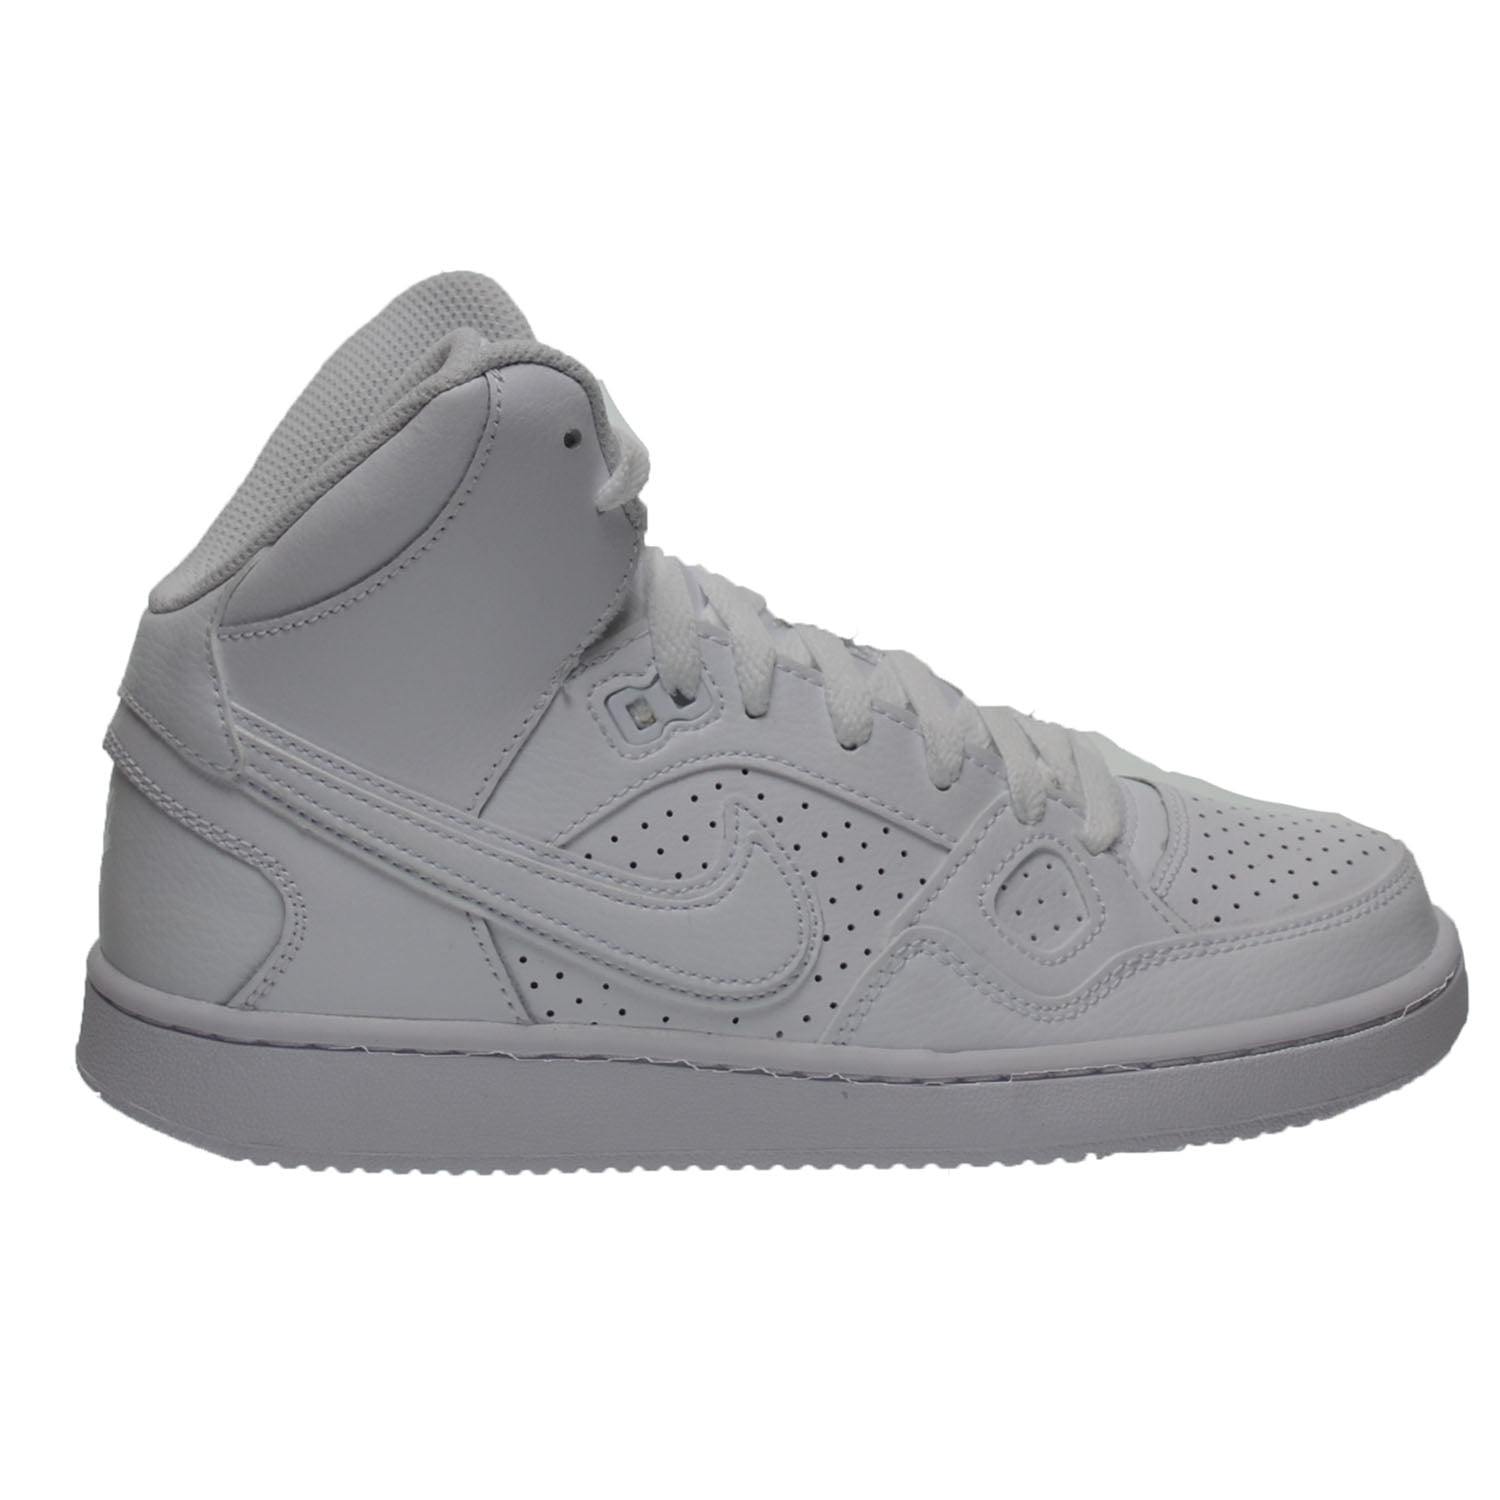 Nike - Nike Son of Force Mid (GS) Big 